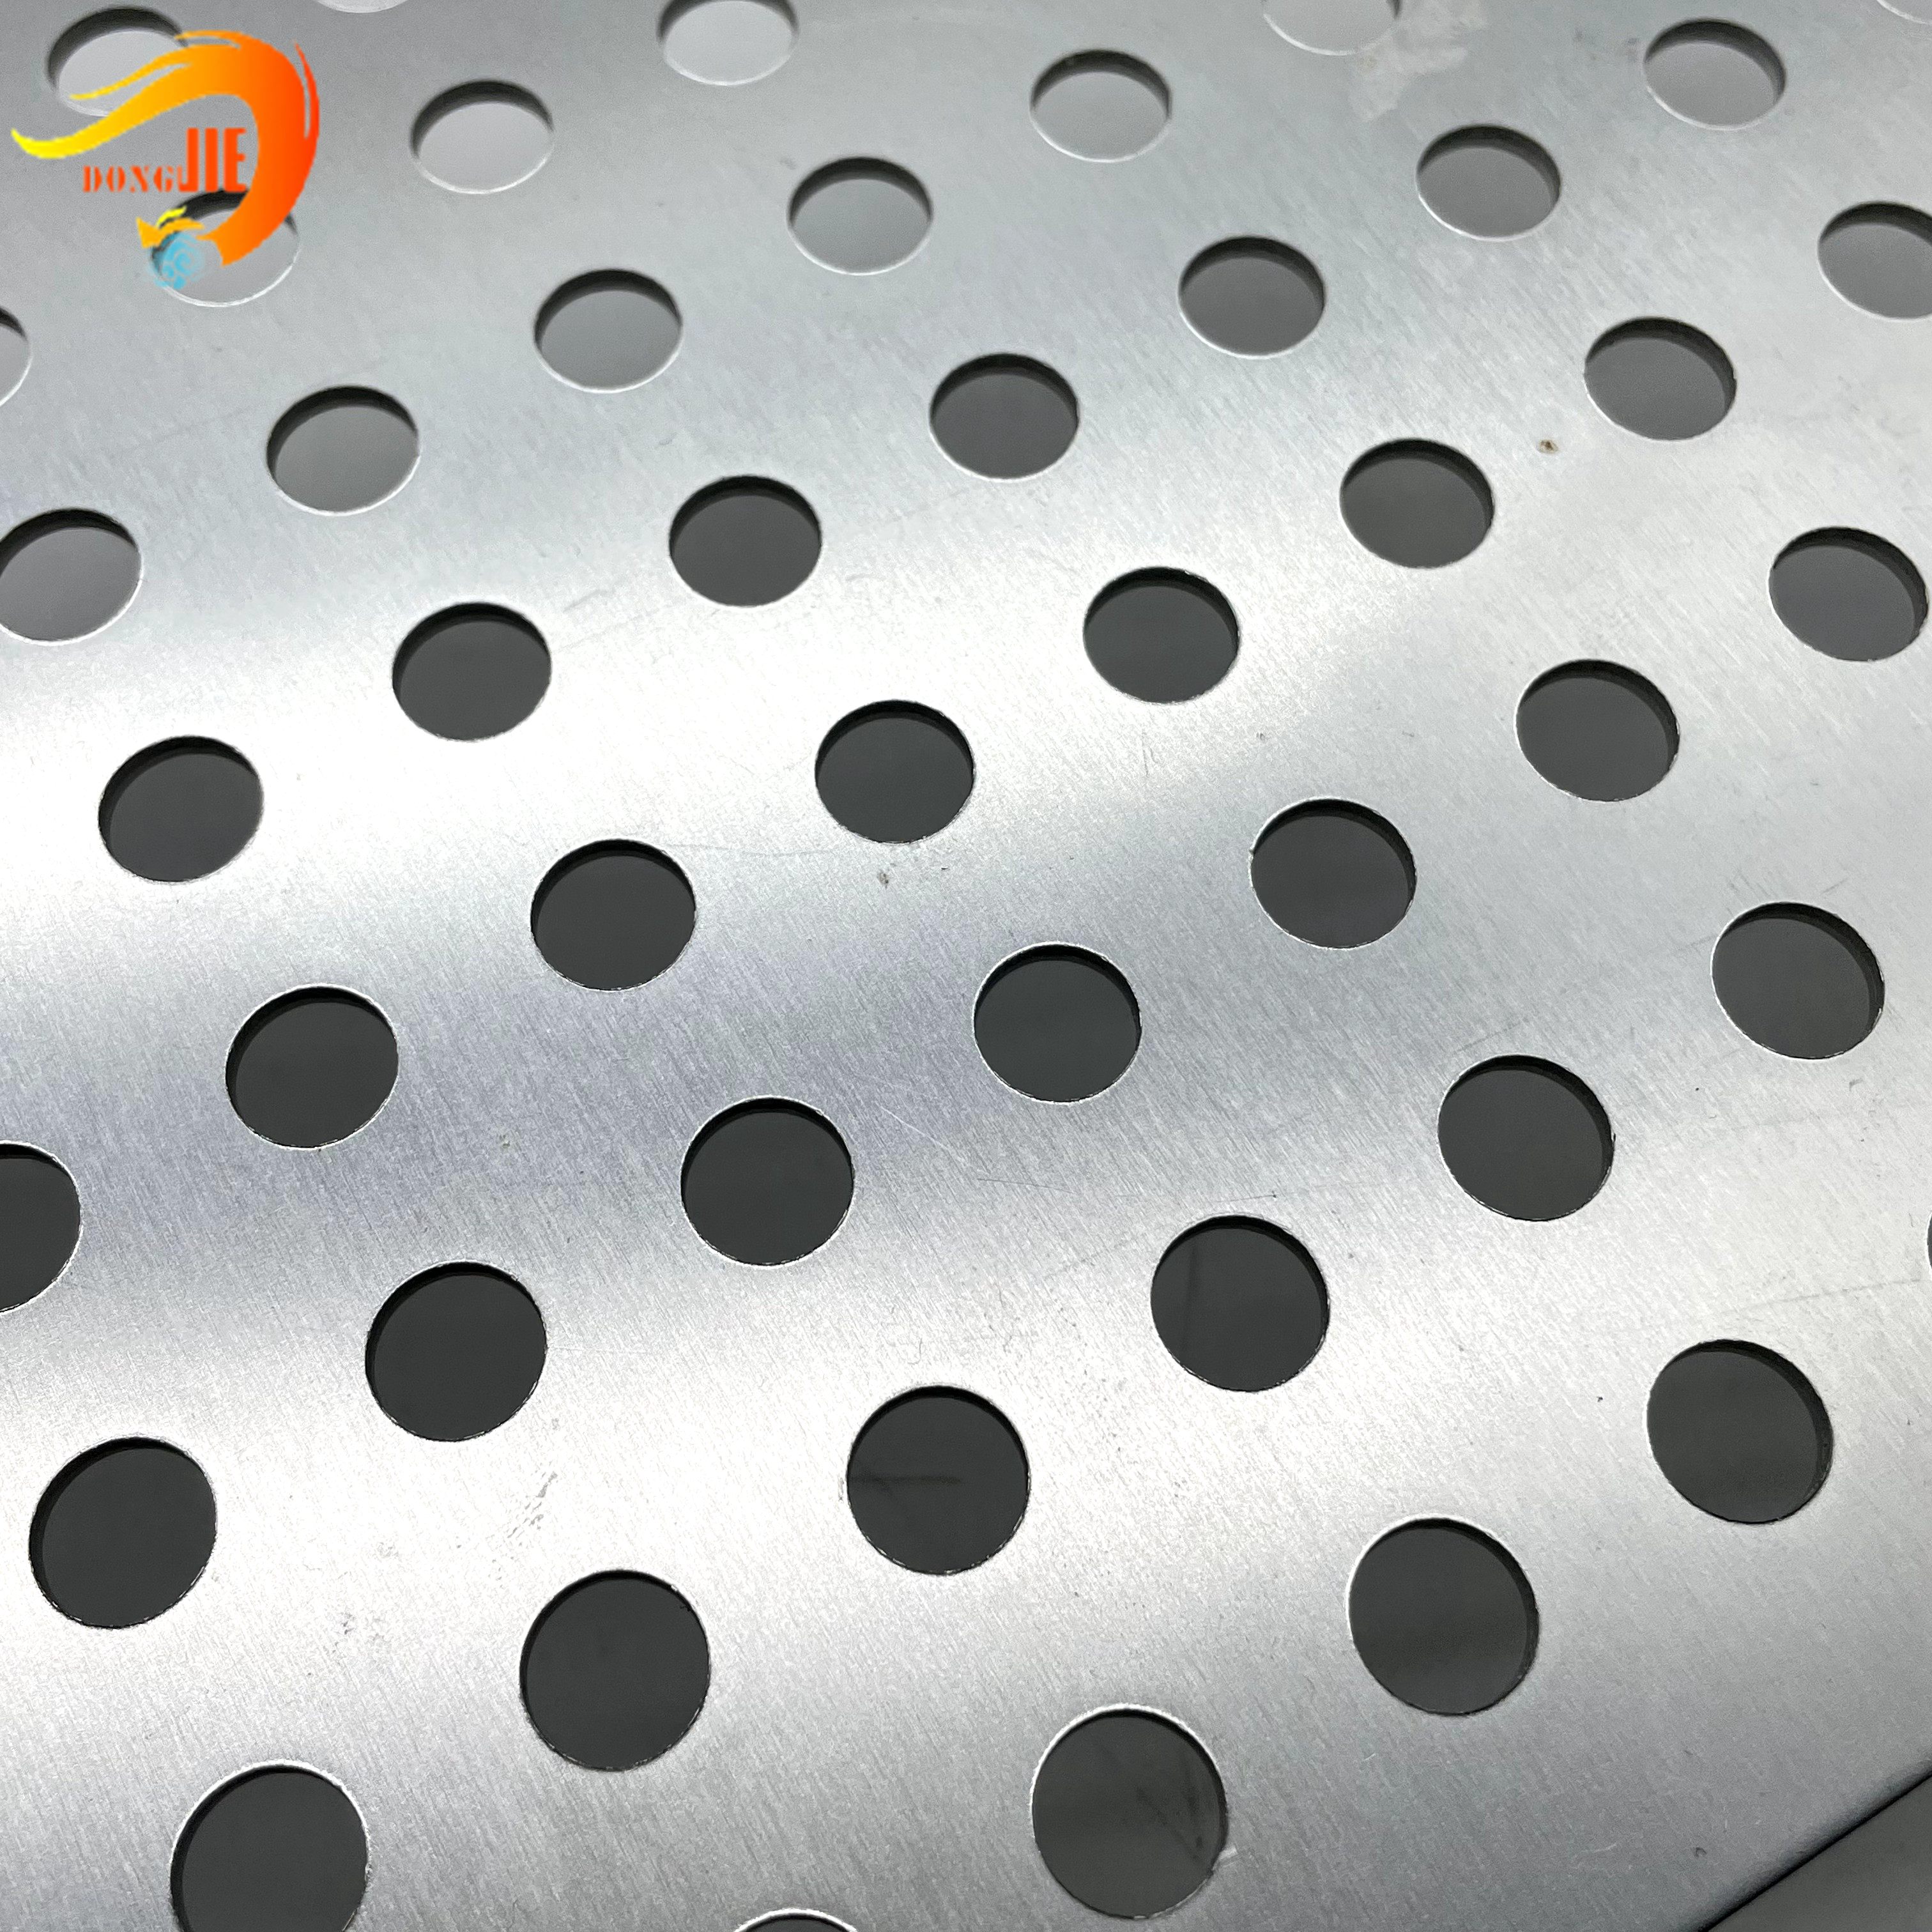 China Plate Perforated, China Perforated Steel, China Perforated Metal, China Perforated Sheet